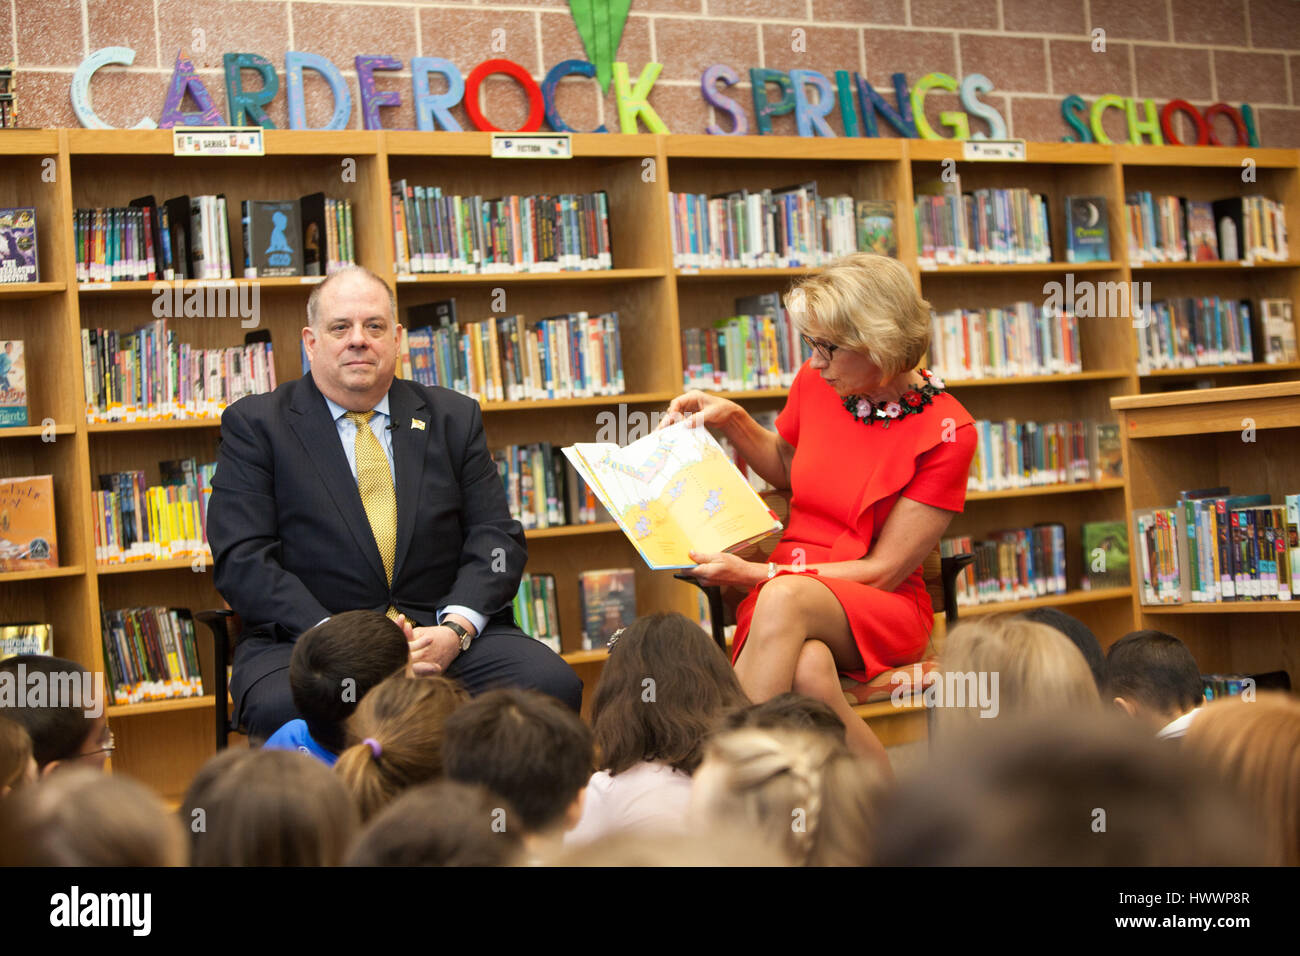 Bethesda, United States Of America. 23rd Mar, 2017. U.S. Secretary of Education Betsy DeVos reads Dr. Seuss to children during a visit with Maryland Gov. Larry Hogan to Carderock Springs Elementary School March 23, 2017 in Bethesda, Maryland. Credit: Planetpix/Alamy Live News Stock Photo